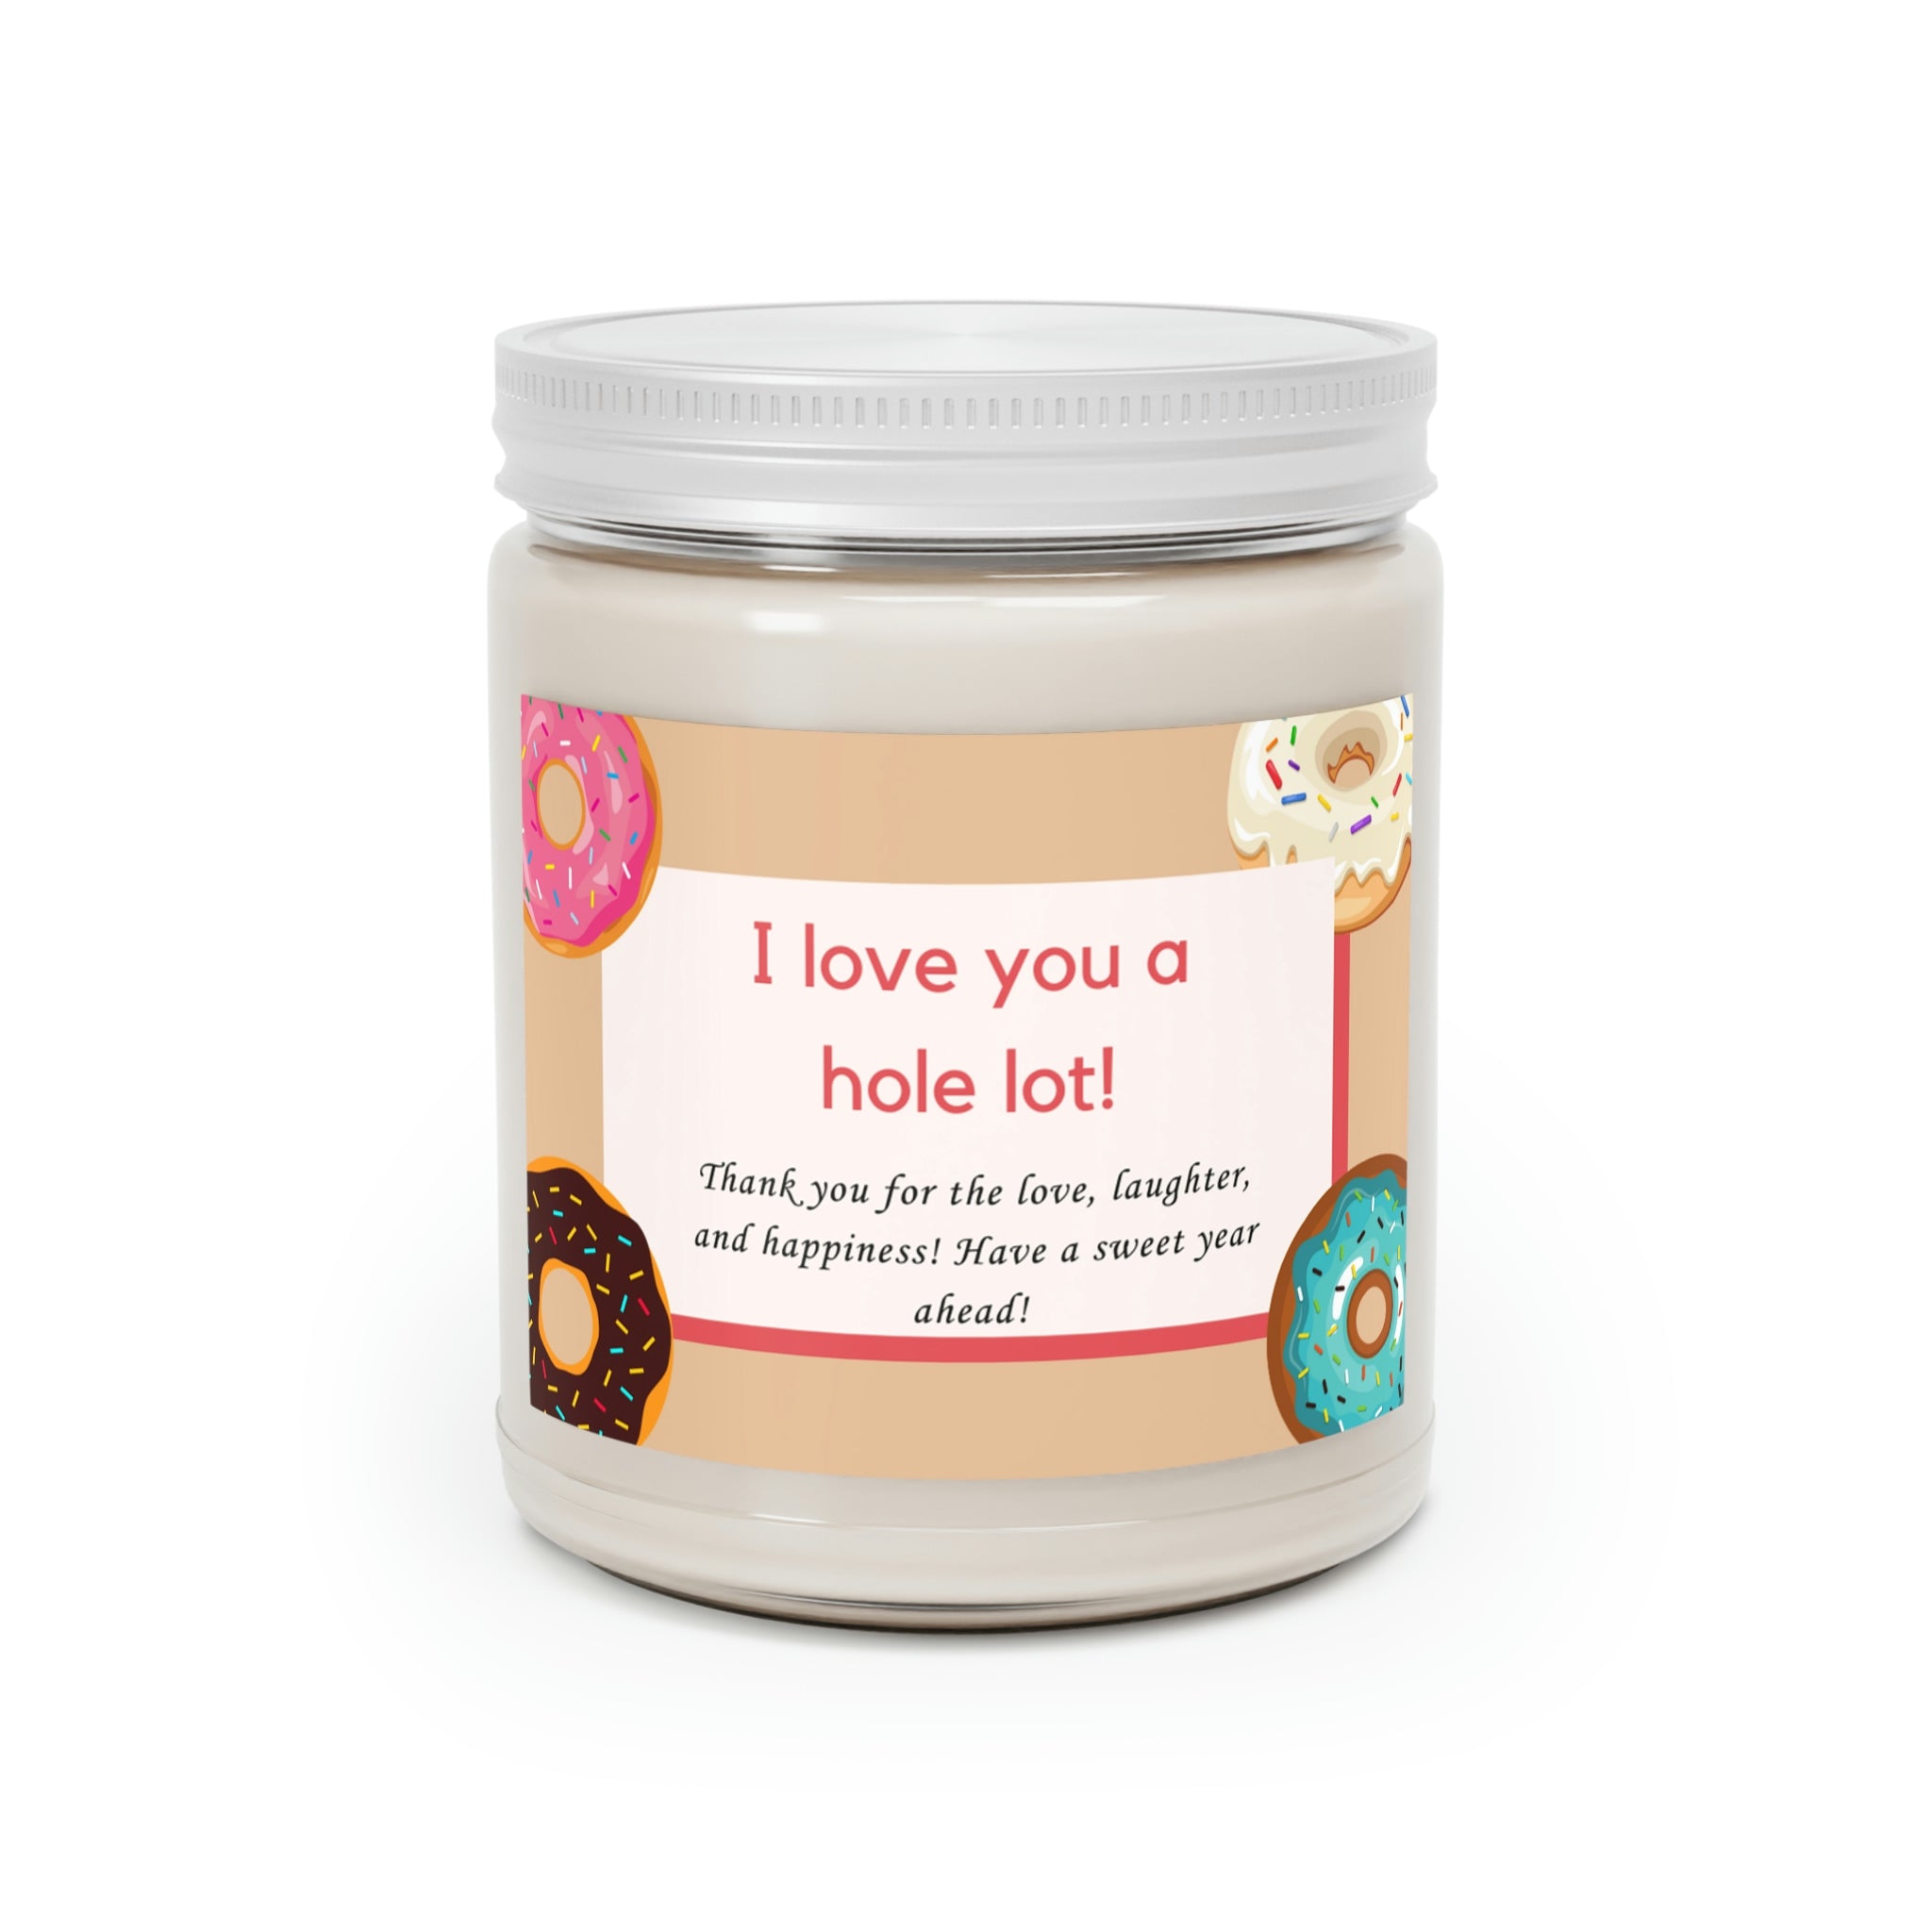 Donut Love Aromatherapy Scented Candle. I love you a hole lot 9oz candle